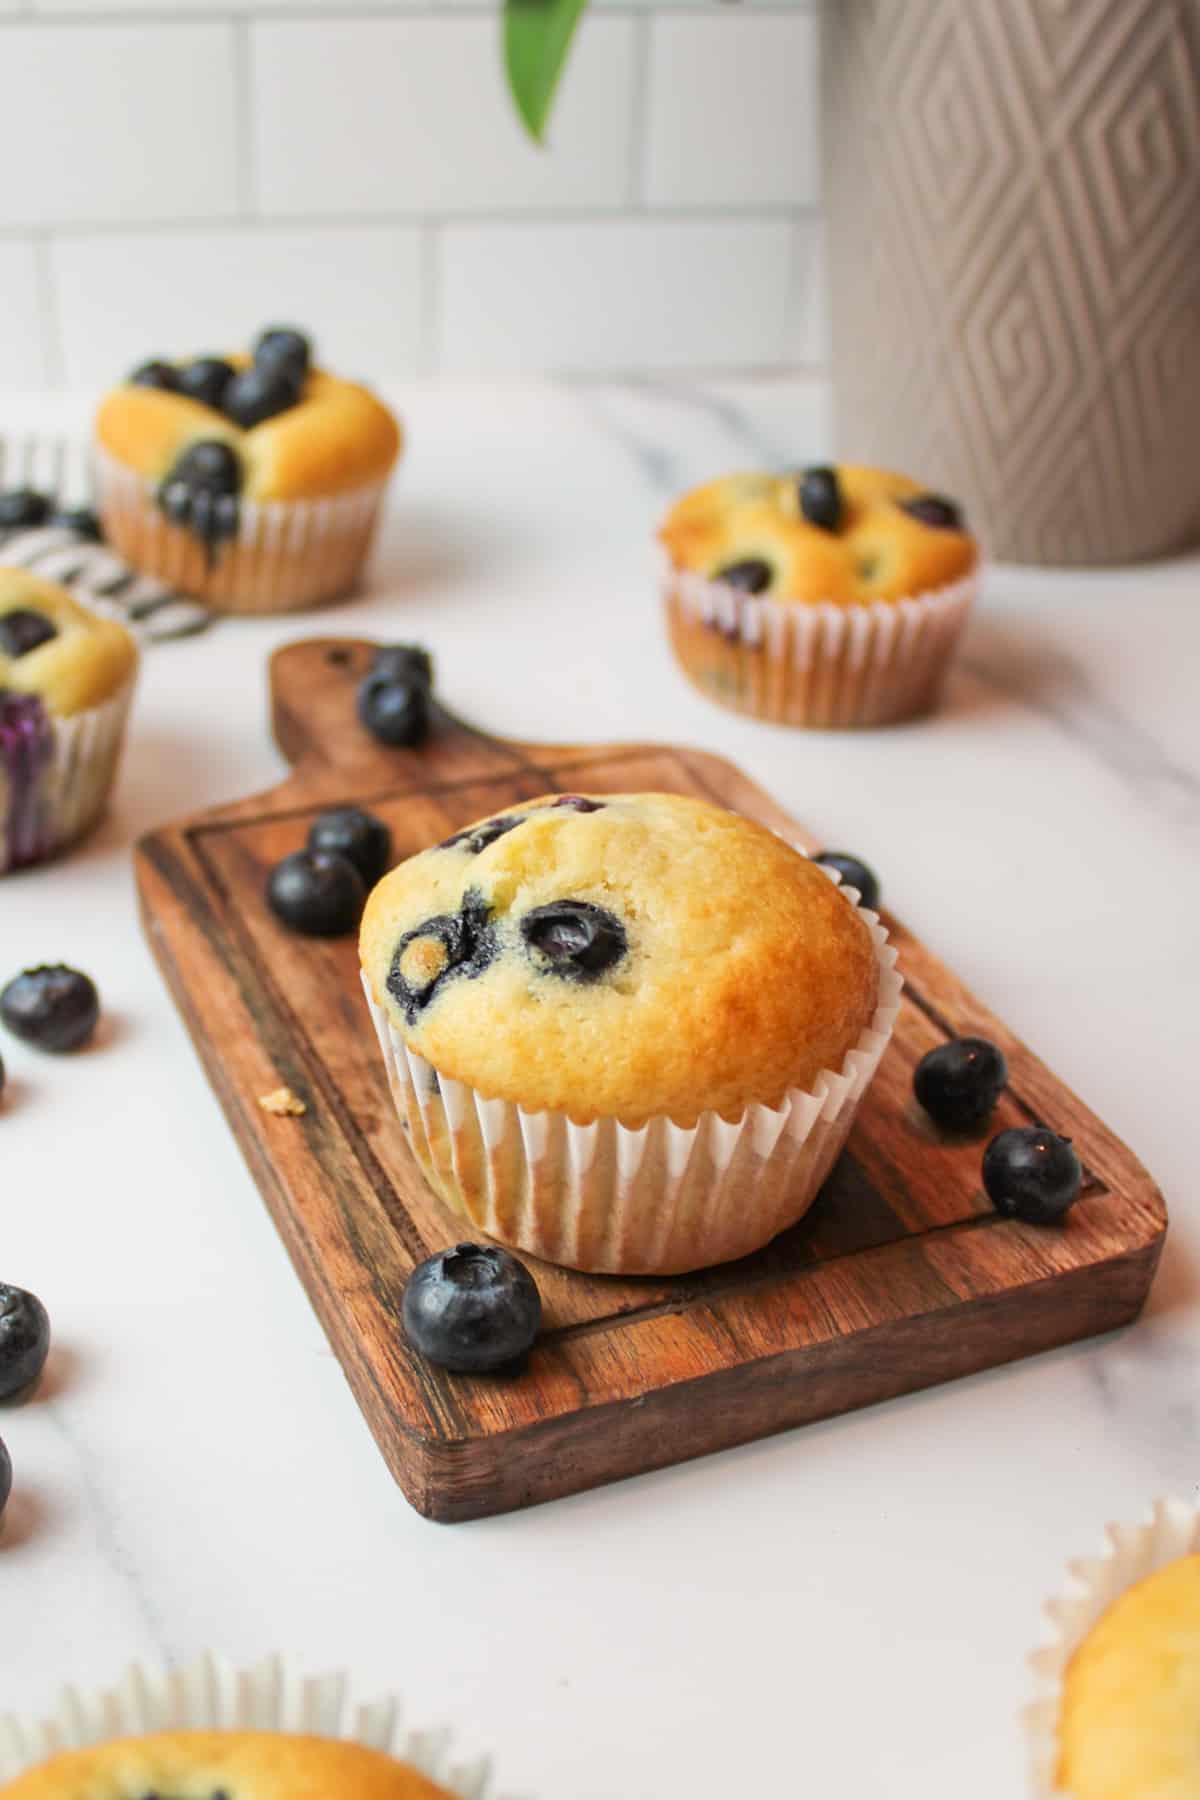 blueberry muffins and scattered blueberries with a muffin in the center of the frame on a wooden cutting board